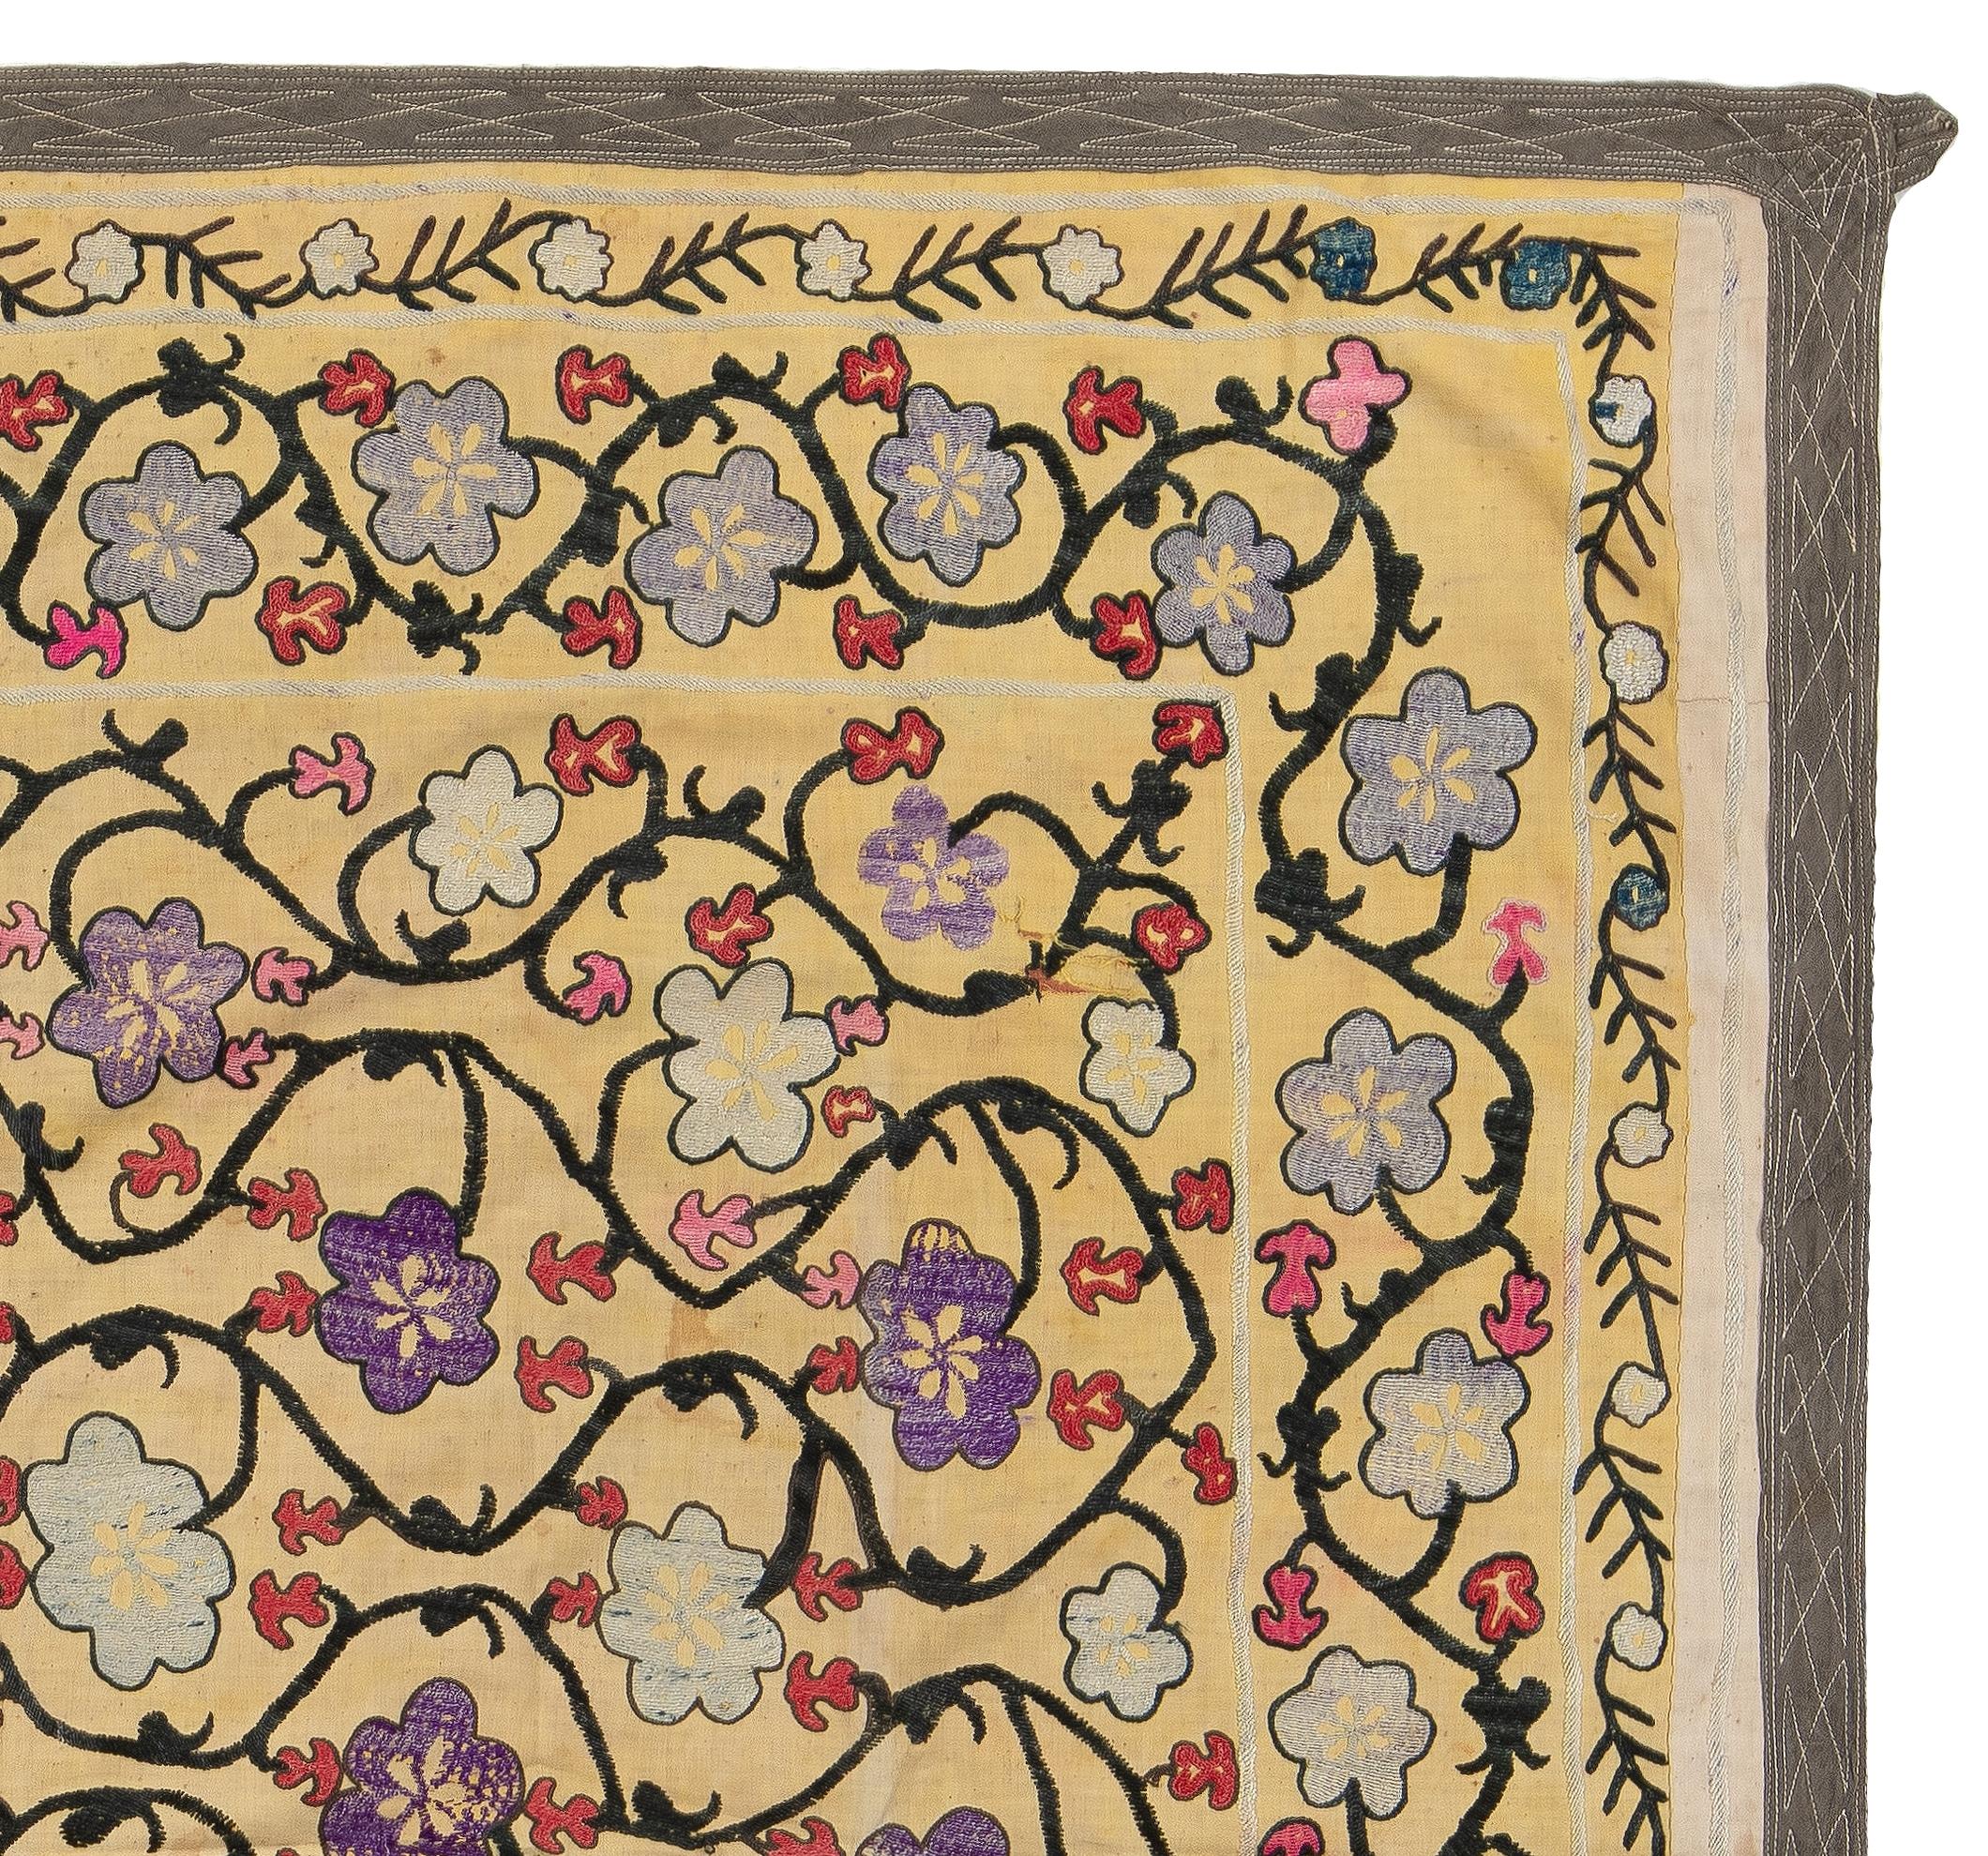 Suzani 4x4.3 Ft Vintage Silk Wall Hanging, Embroidered Textile, Needlework Table Cover For Sale